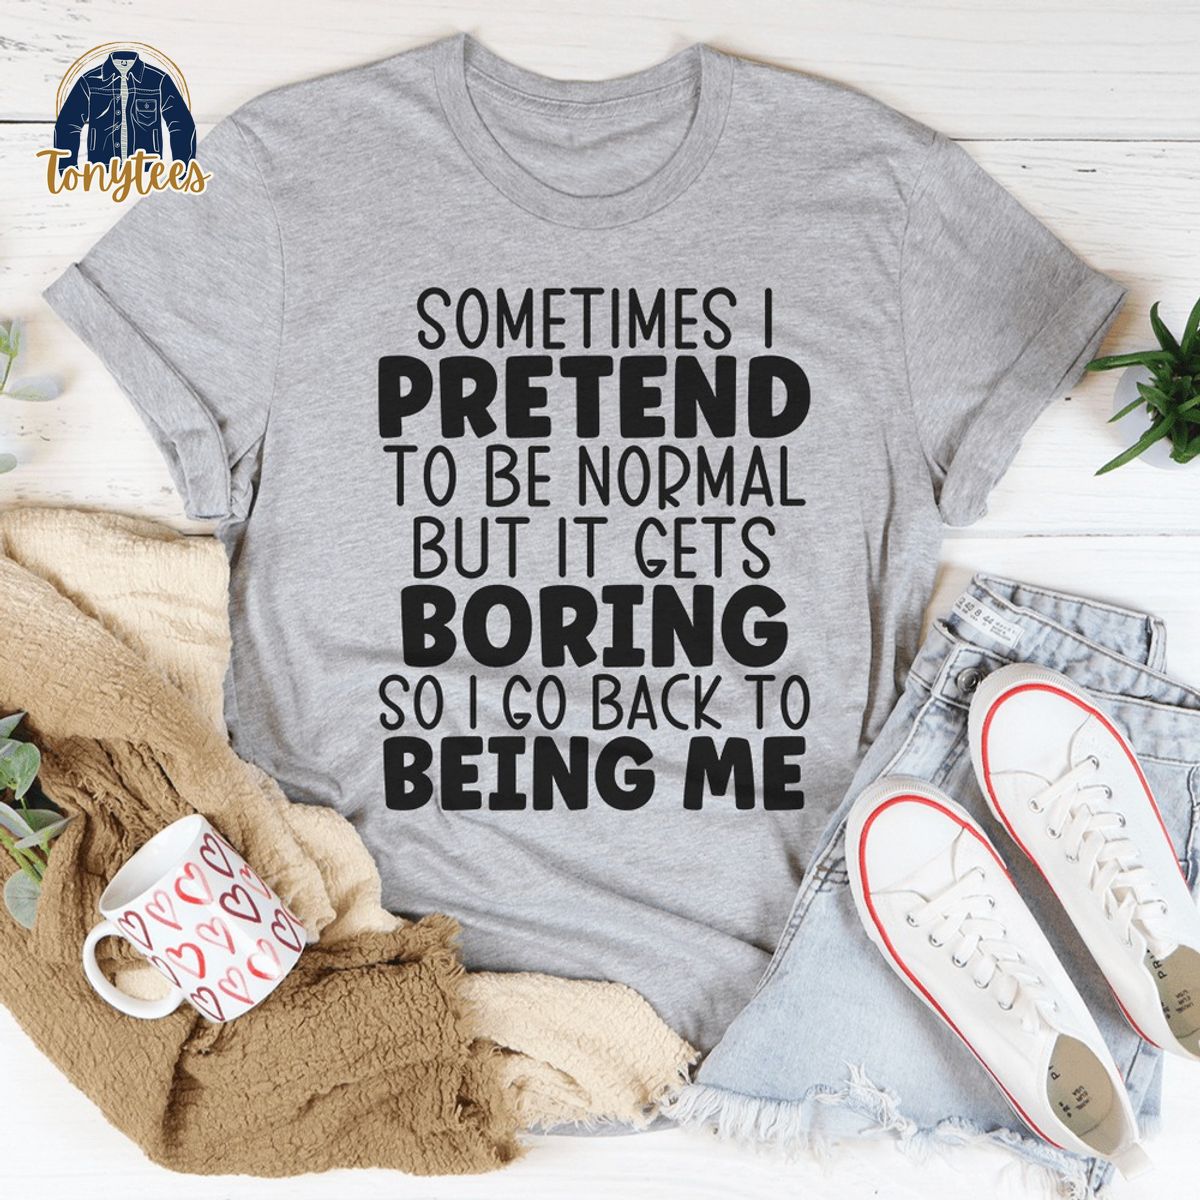 Sometimes I pretend to be normal but I gets boring so I go back to me being me shirt